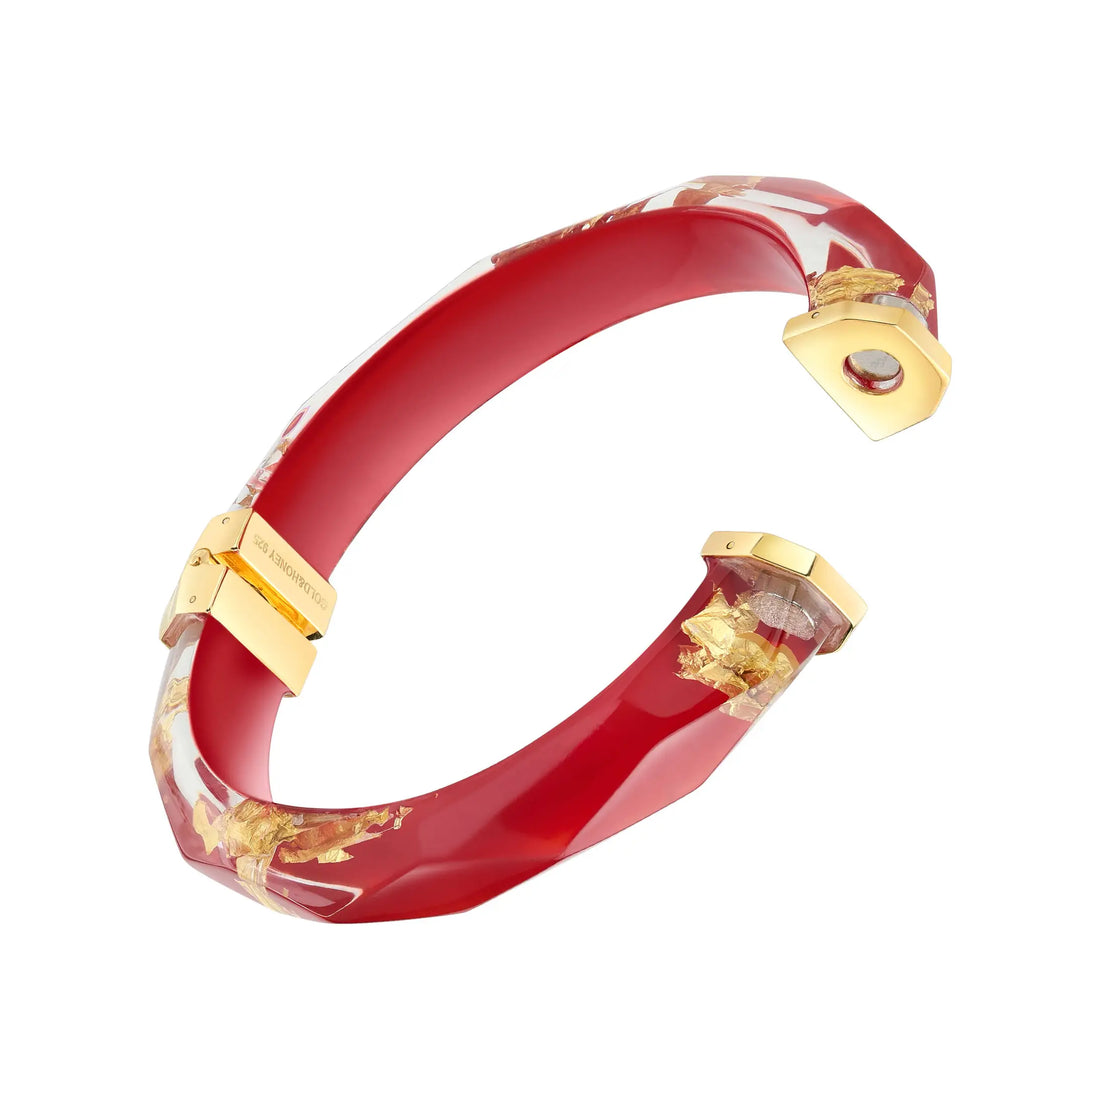 Carnelian 24K Gold Leaf Faceted Bangle with Hinge - Lucette Collection